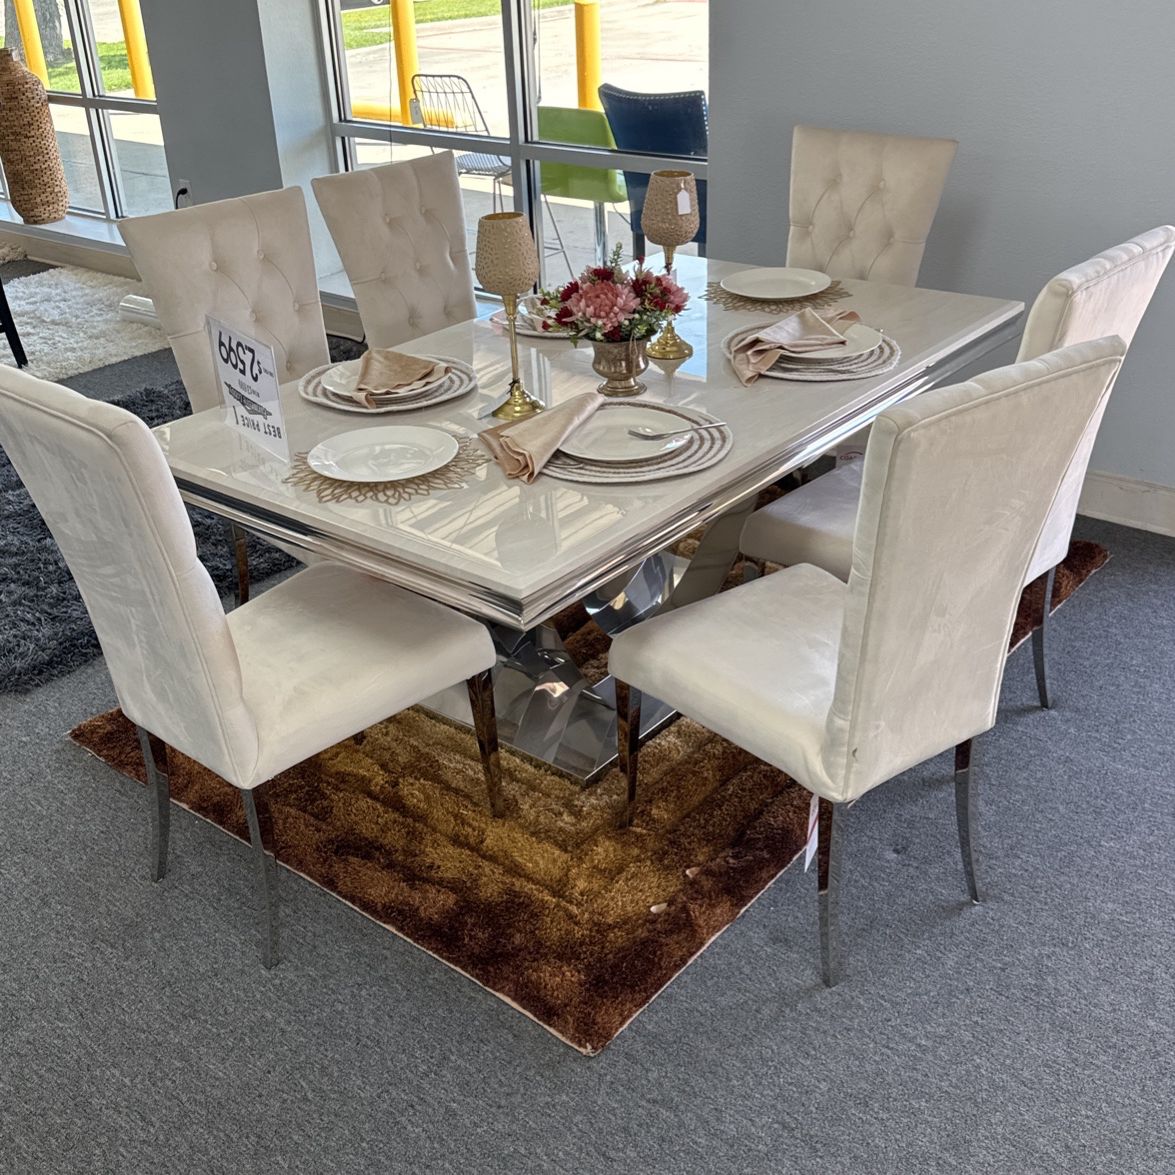 7 Piece Dinings Table Set $1800